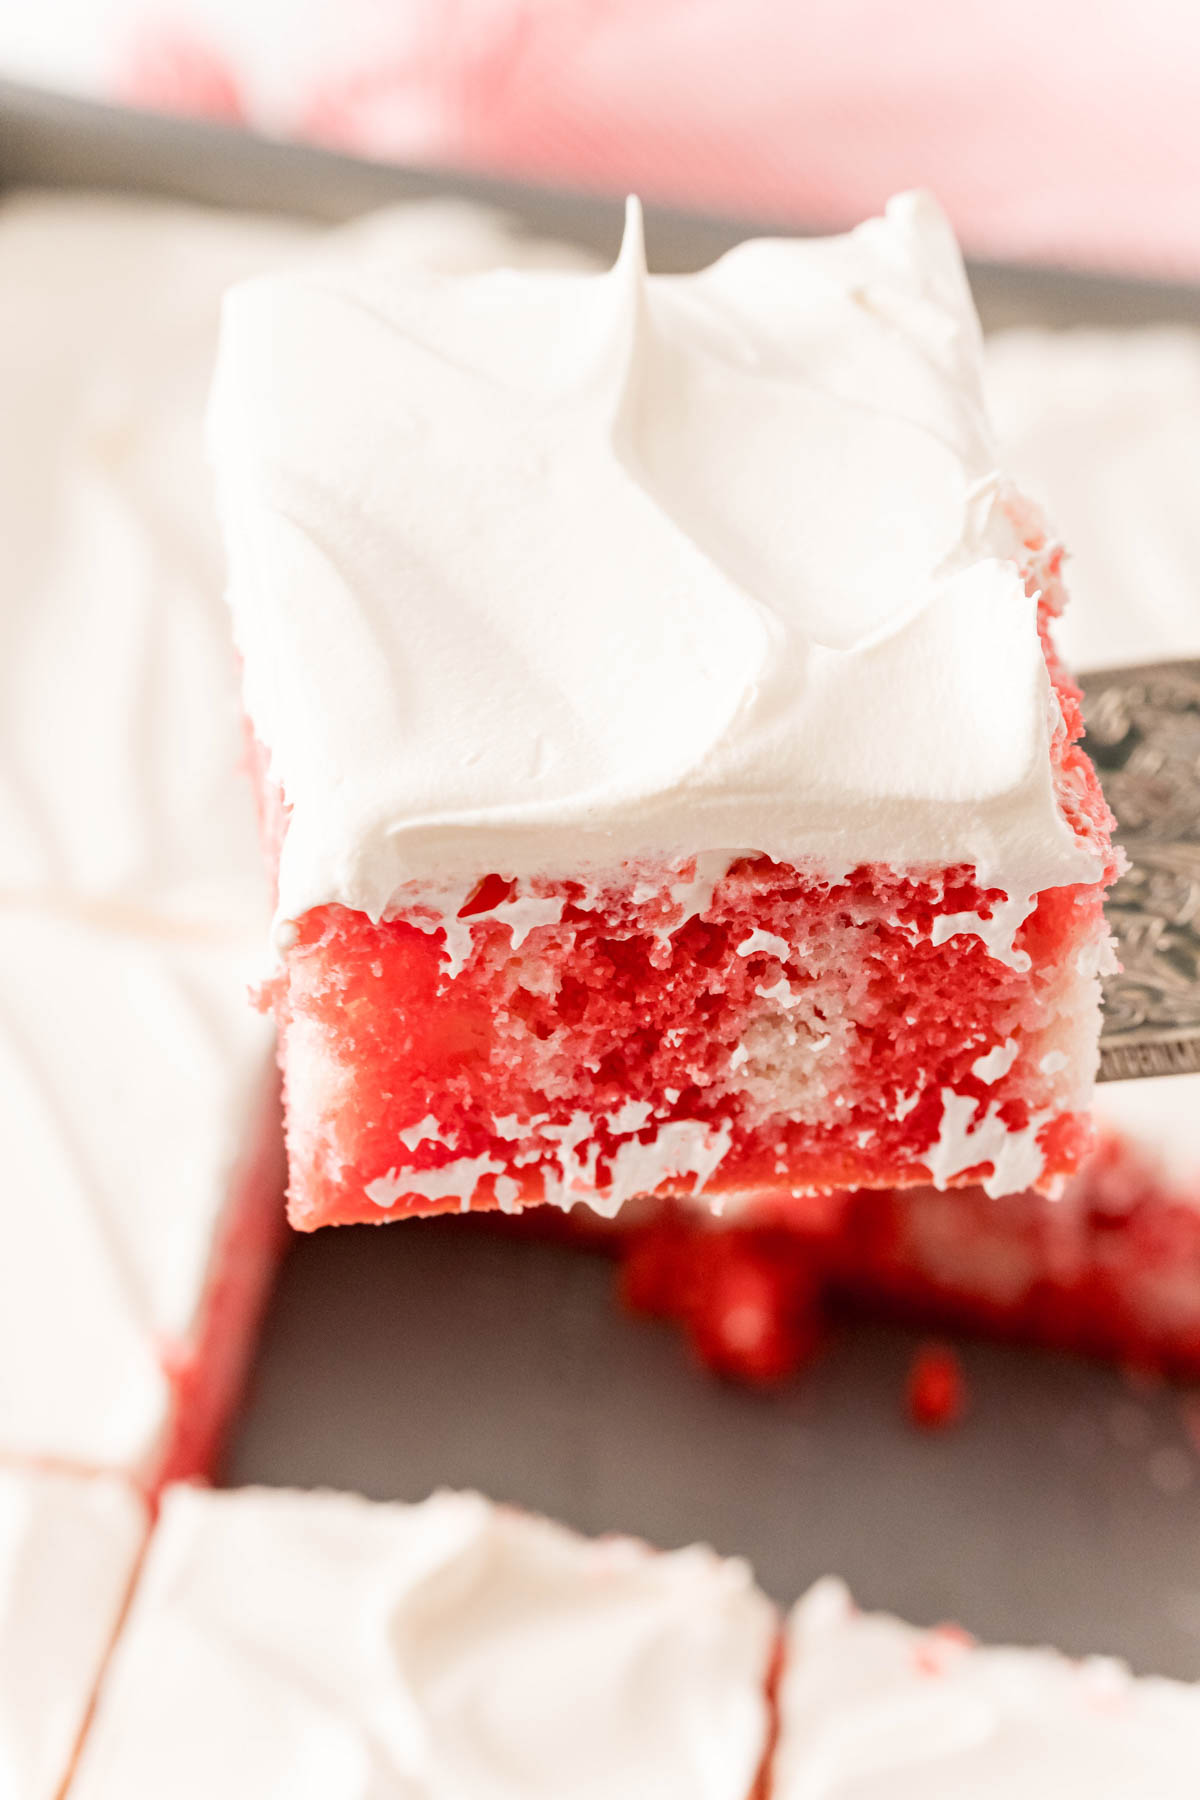 slice of raspberry jello poke cake with whipped topping